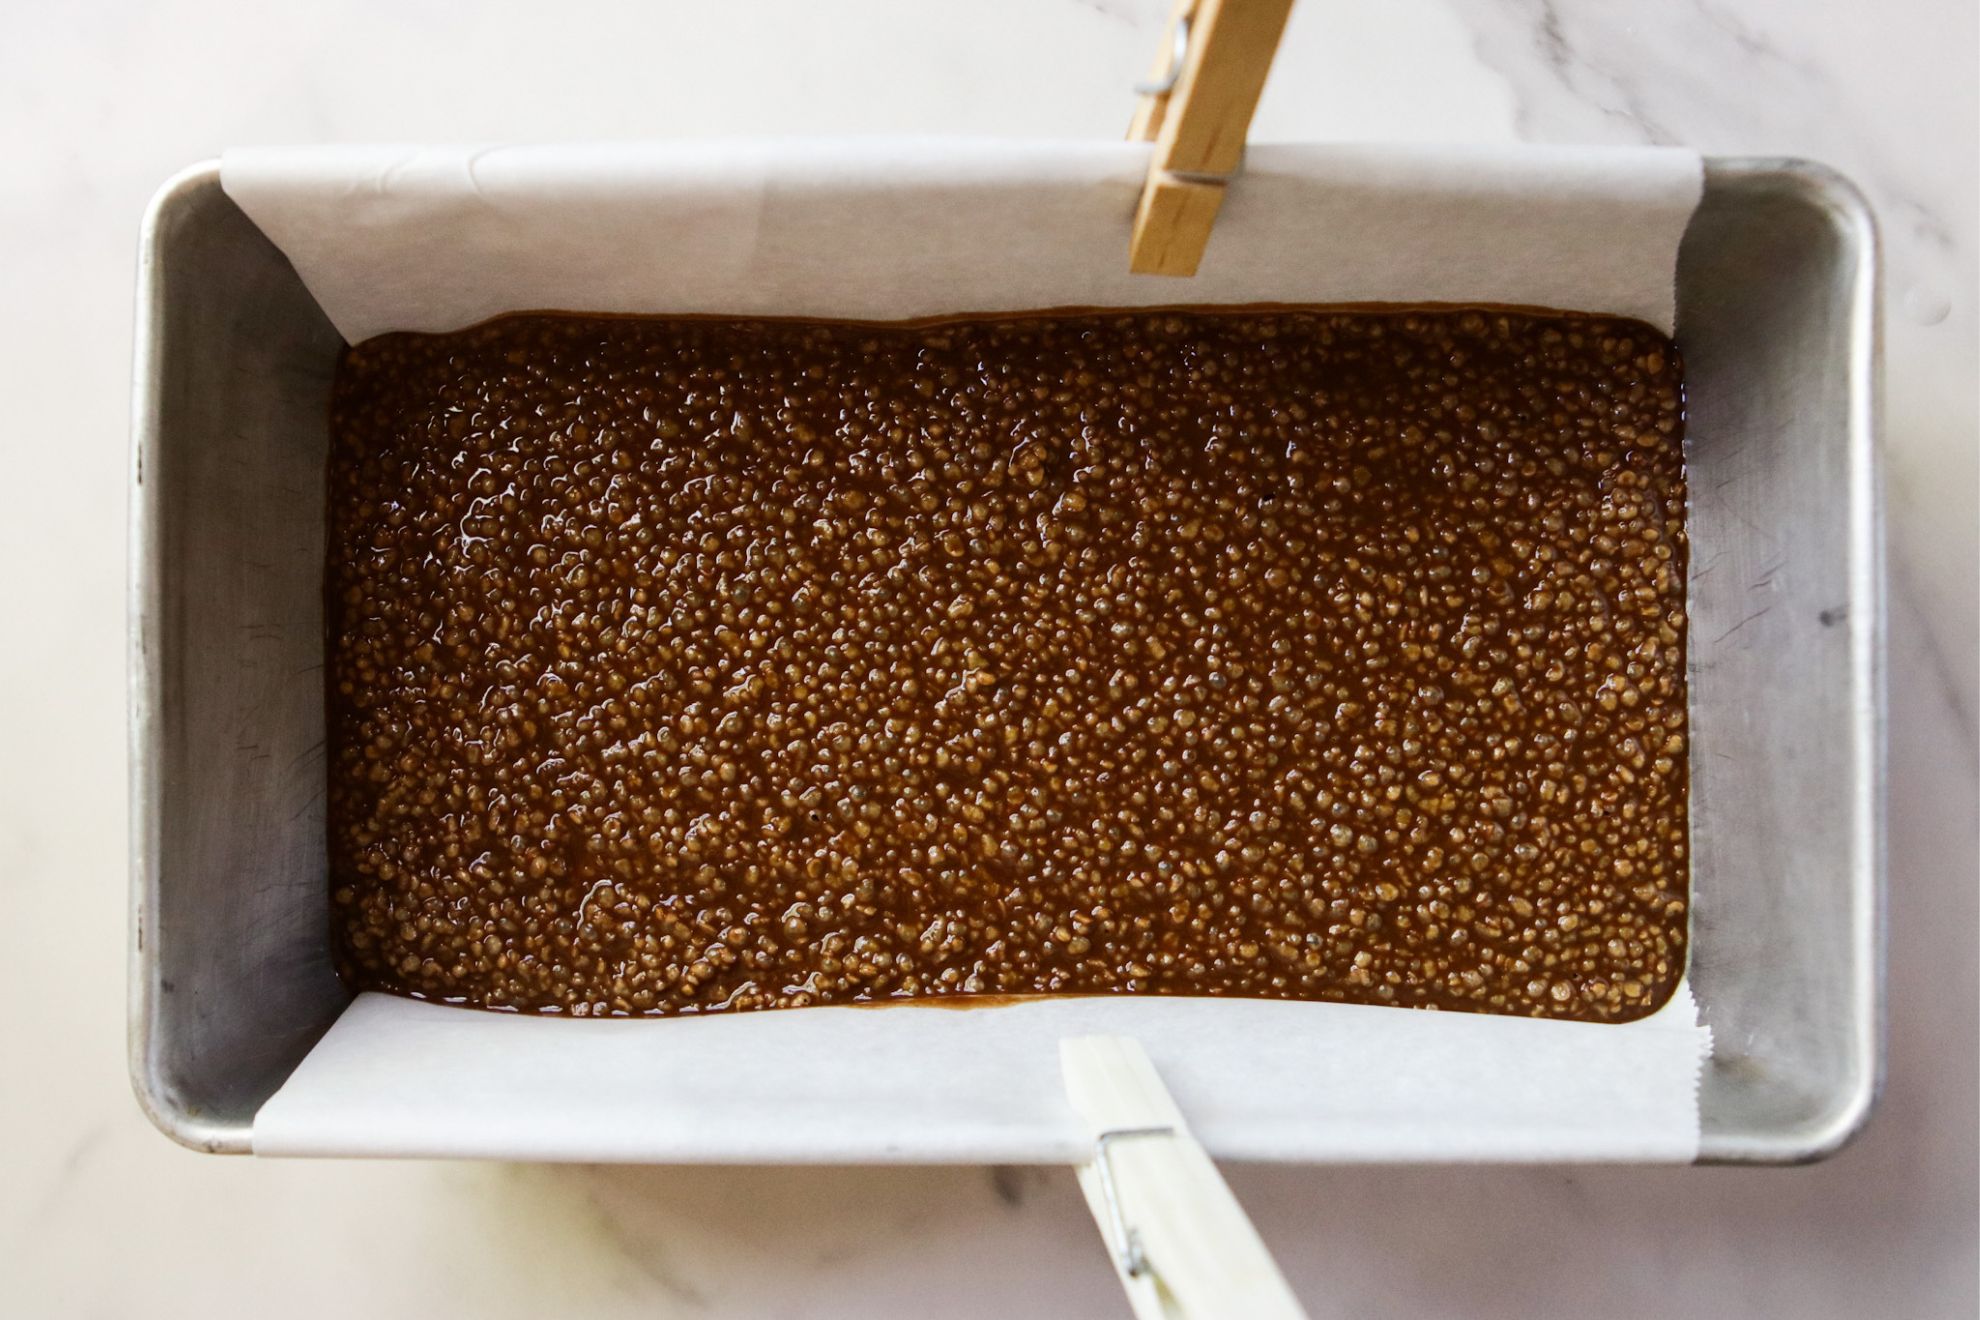 This is an overhead horizontal image of a bread pan lined with parchment paper hanging over the long two sides of the pan. The parchment paper is secured by clothespins on either side. In the pan is a chocolate puffed quinoa mixture spread across the bottom.